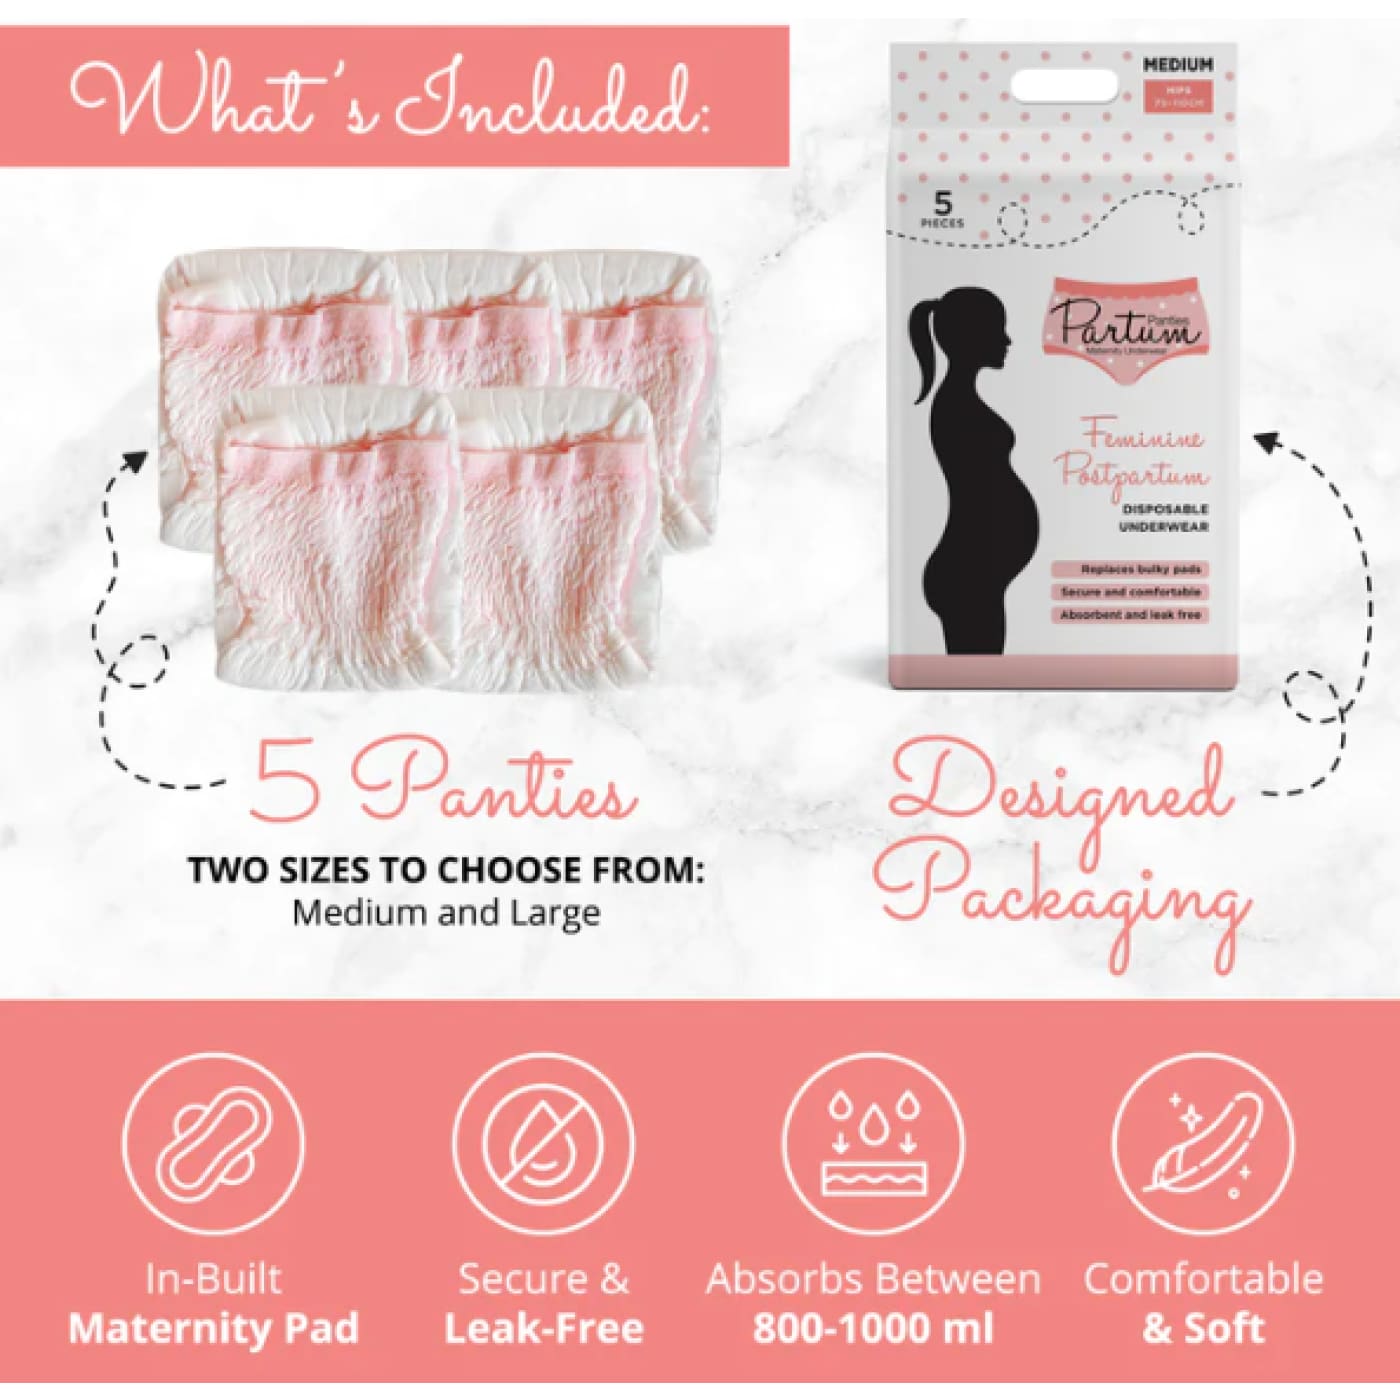 Partum Panties - Maternity Disposable Pack 5 - Large - Large - FOR MUM - MATERNITY BRAS/CAMI TOPS/UNDERWEAR